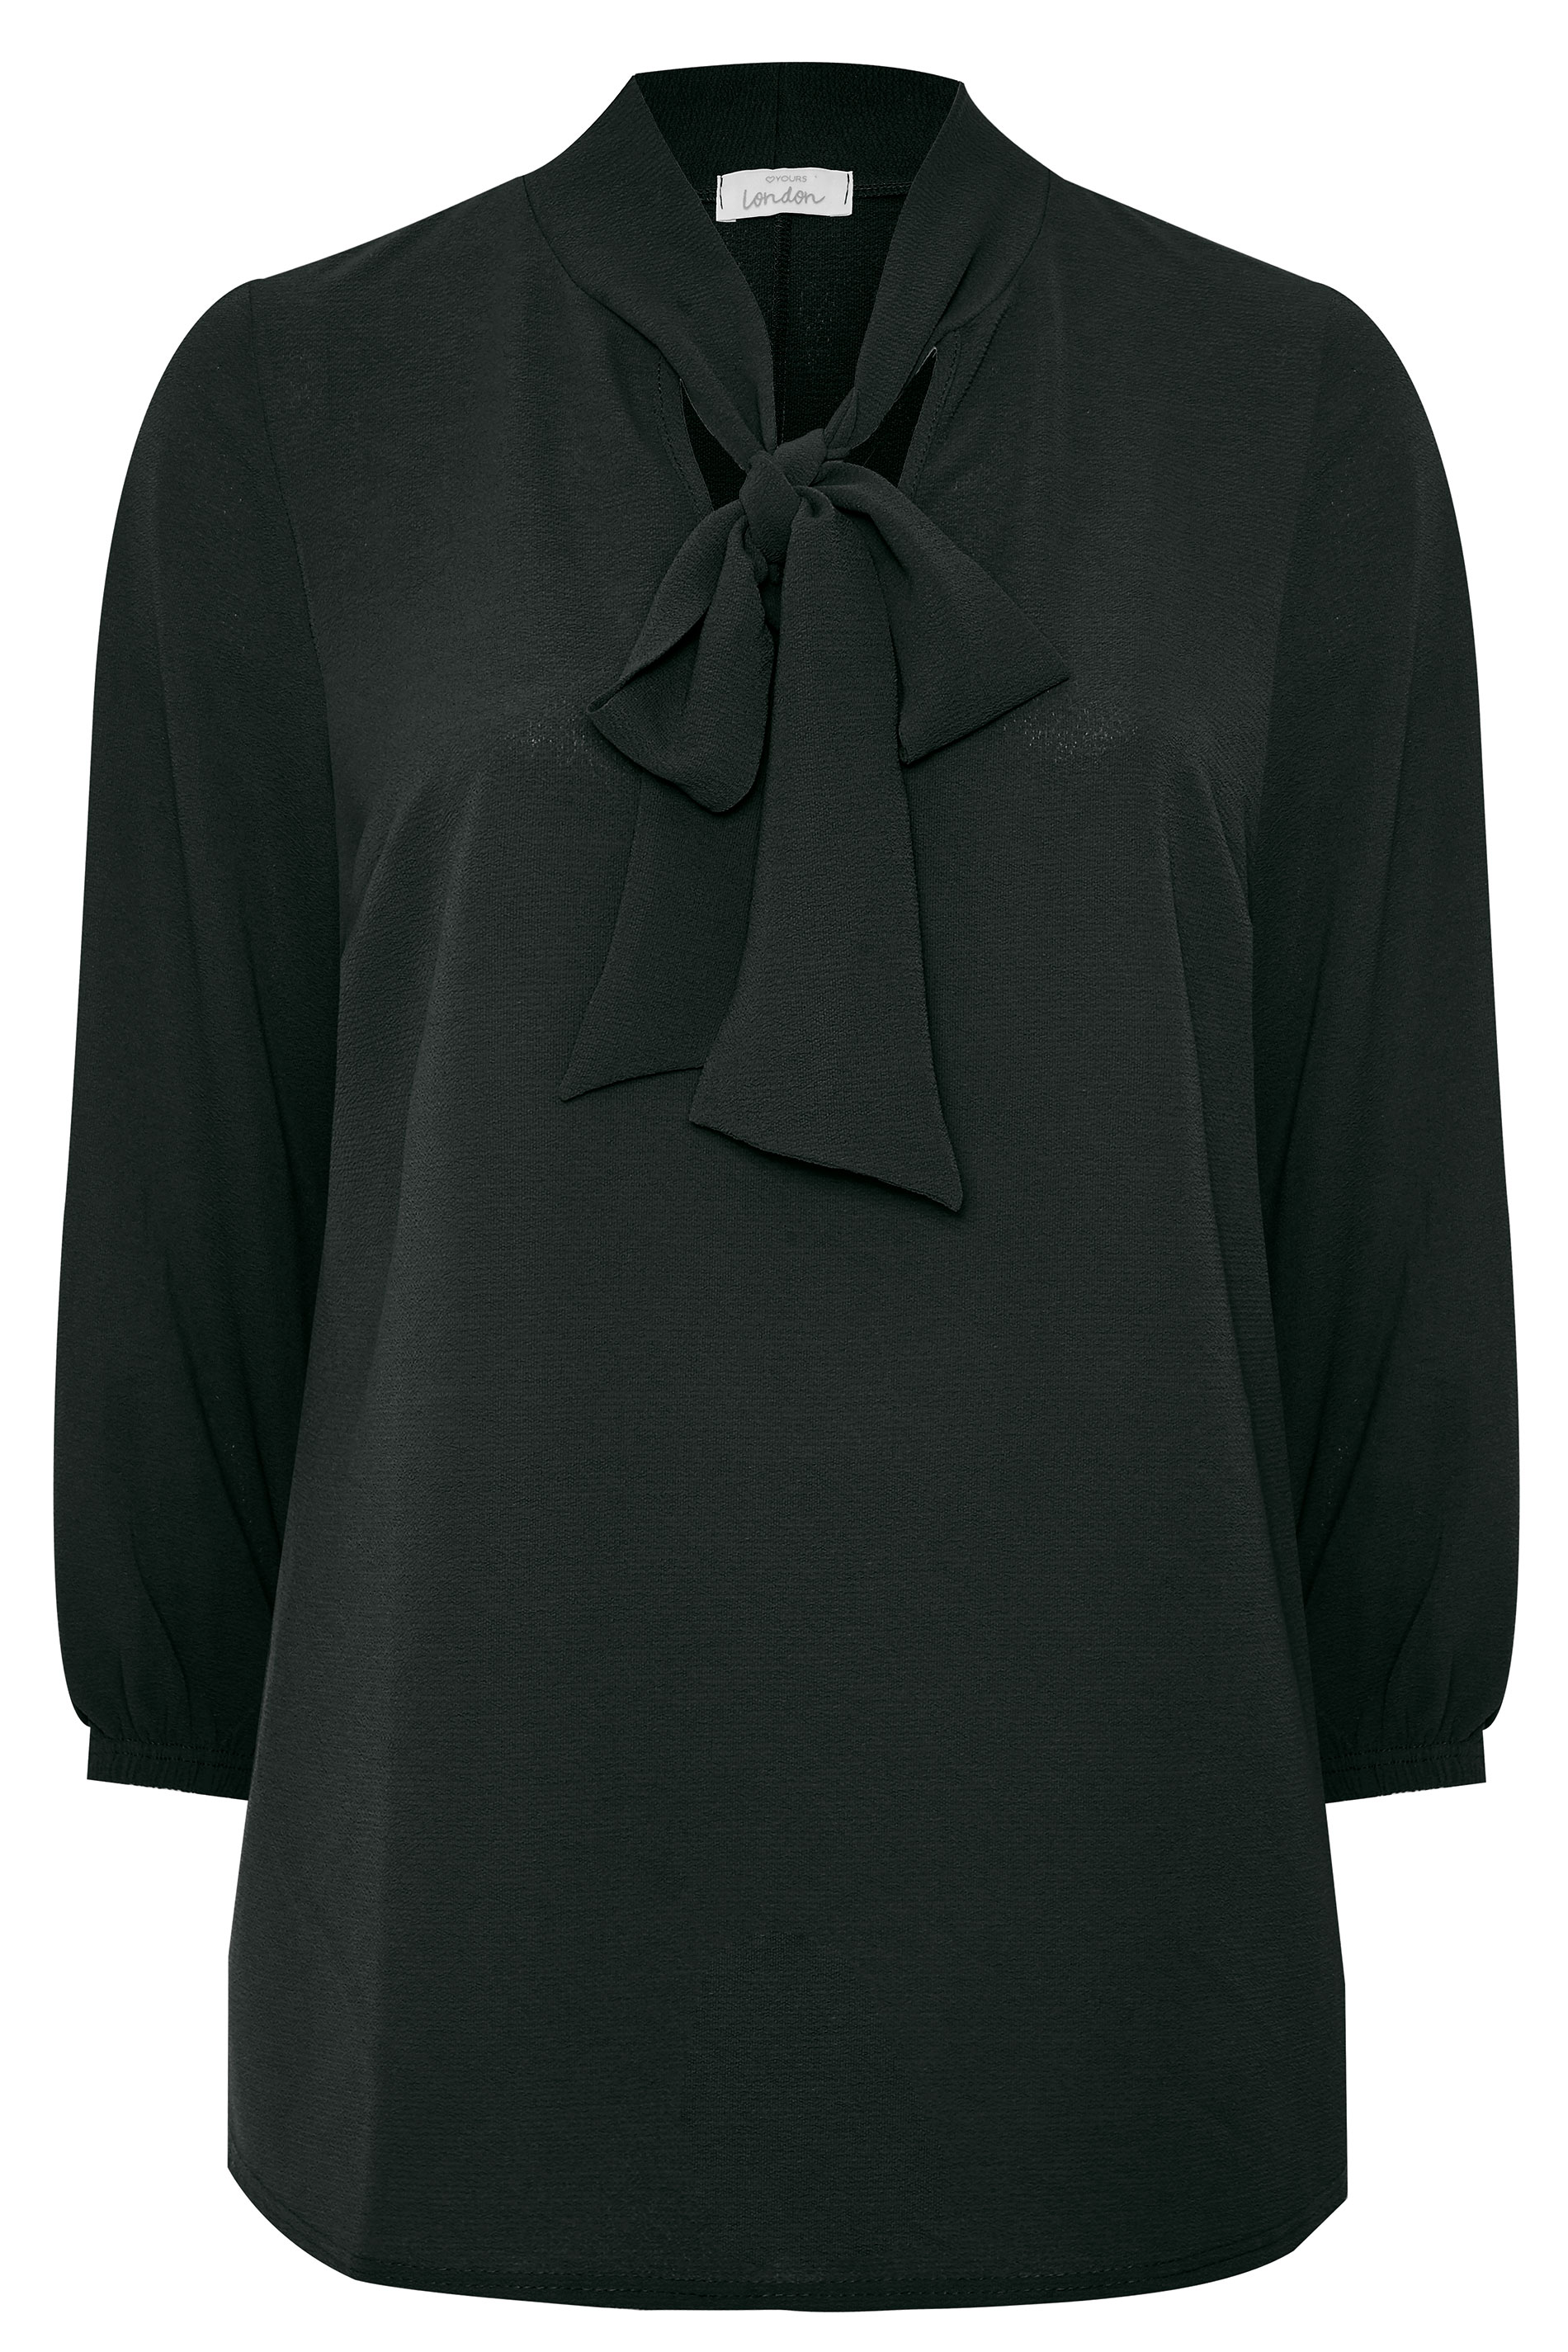 YOURS LONDON Black Bow Blouse | Yours Clothing